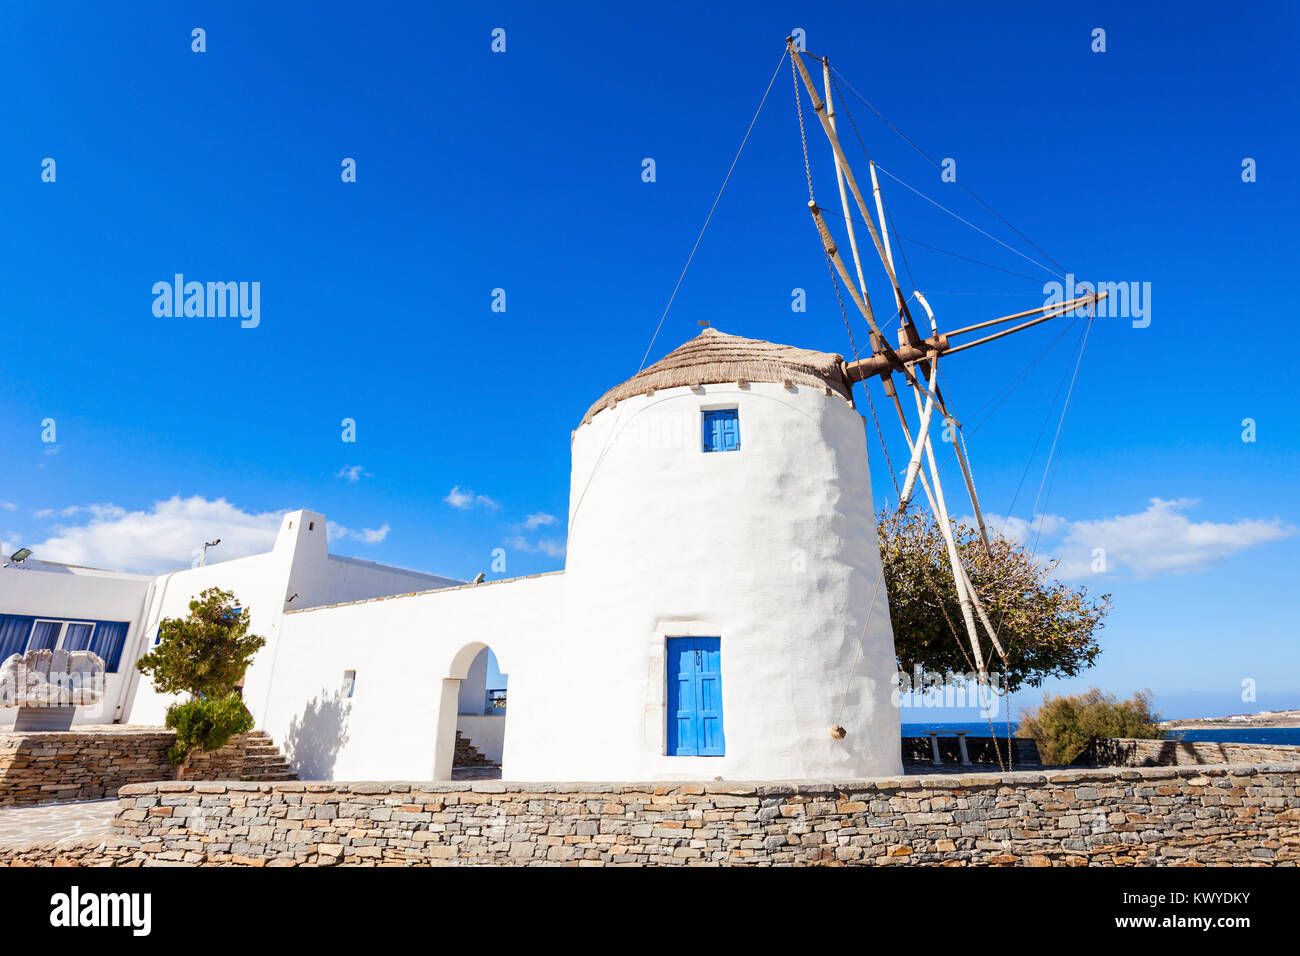 Traditional cycladic windmill in Parikia town, on the island of Paros in Greece Stock Photo